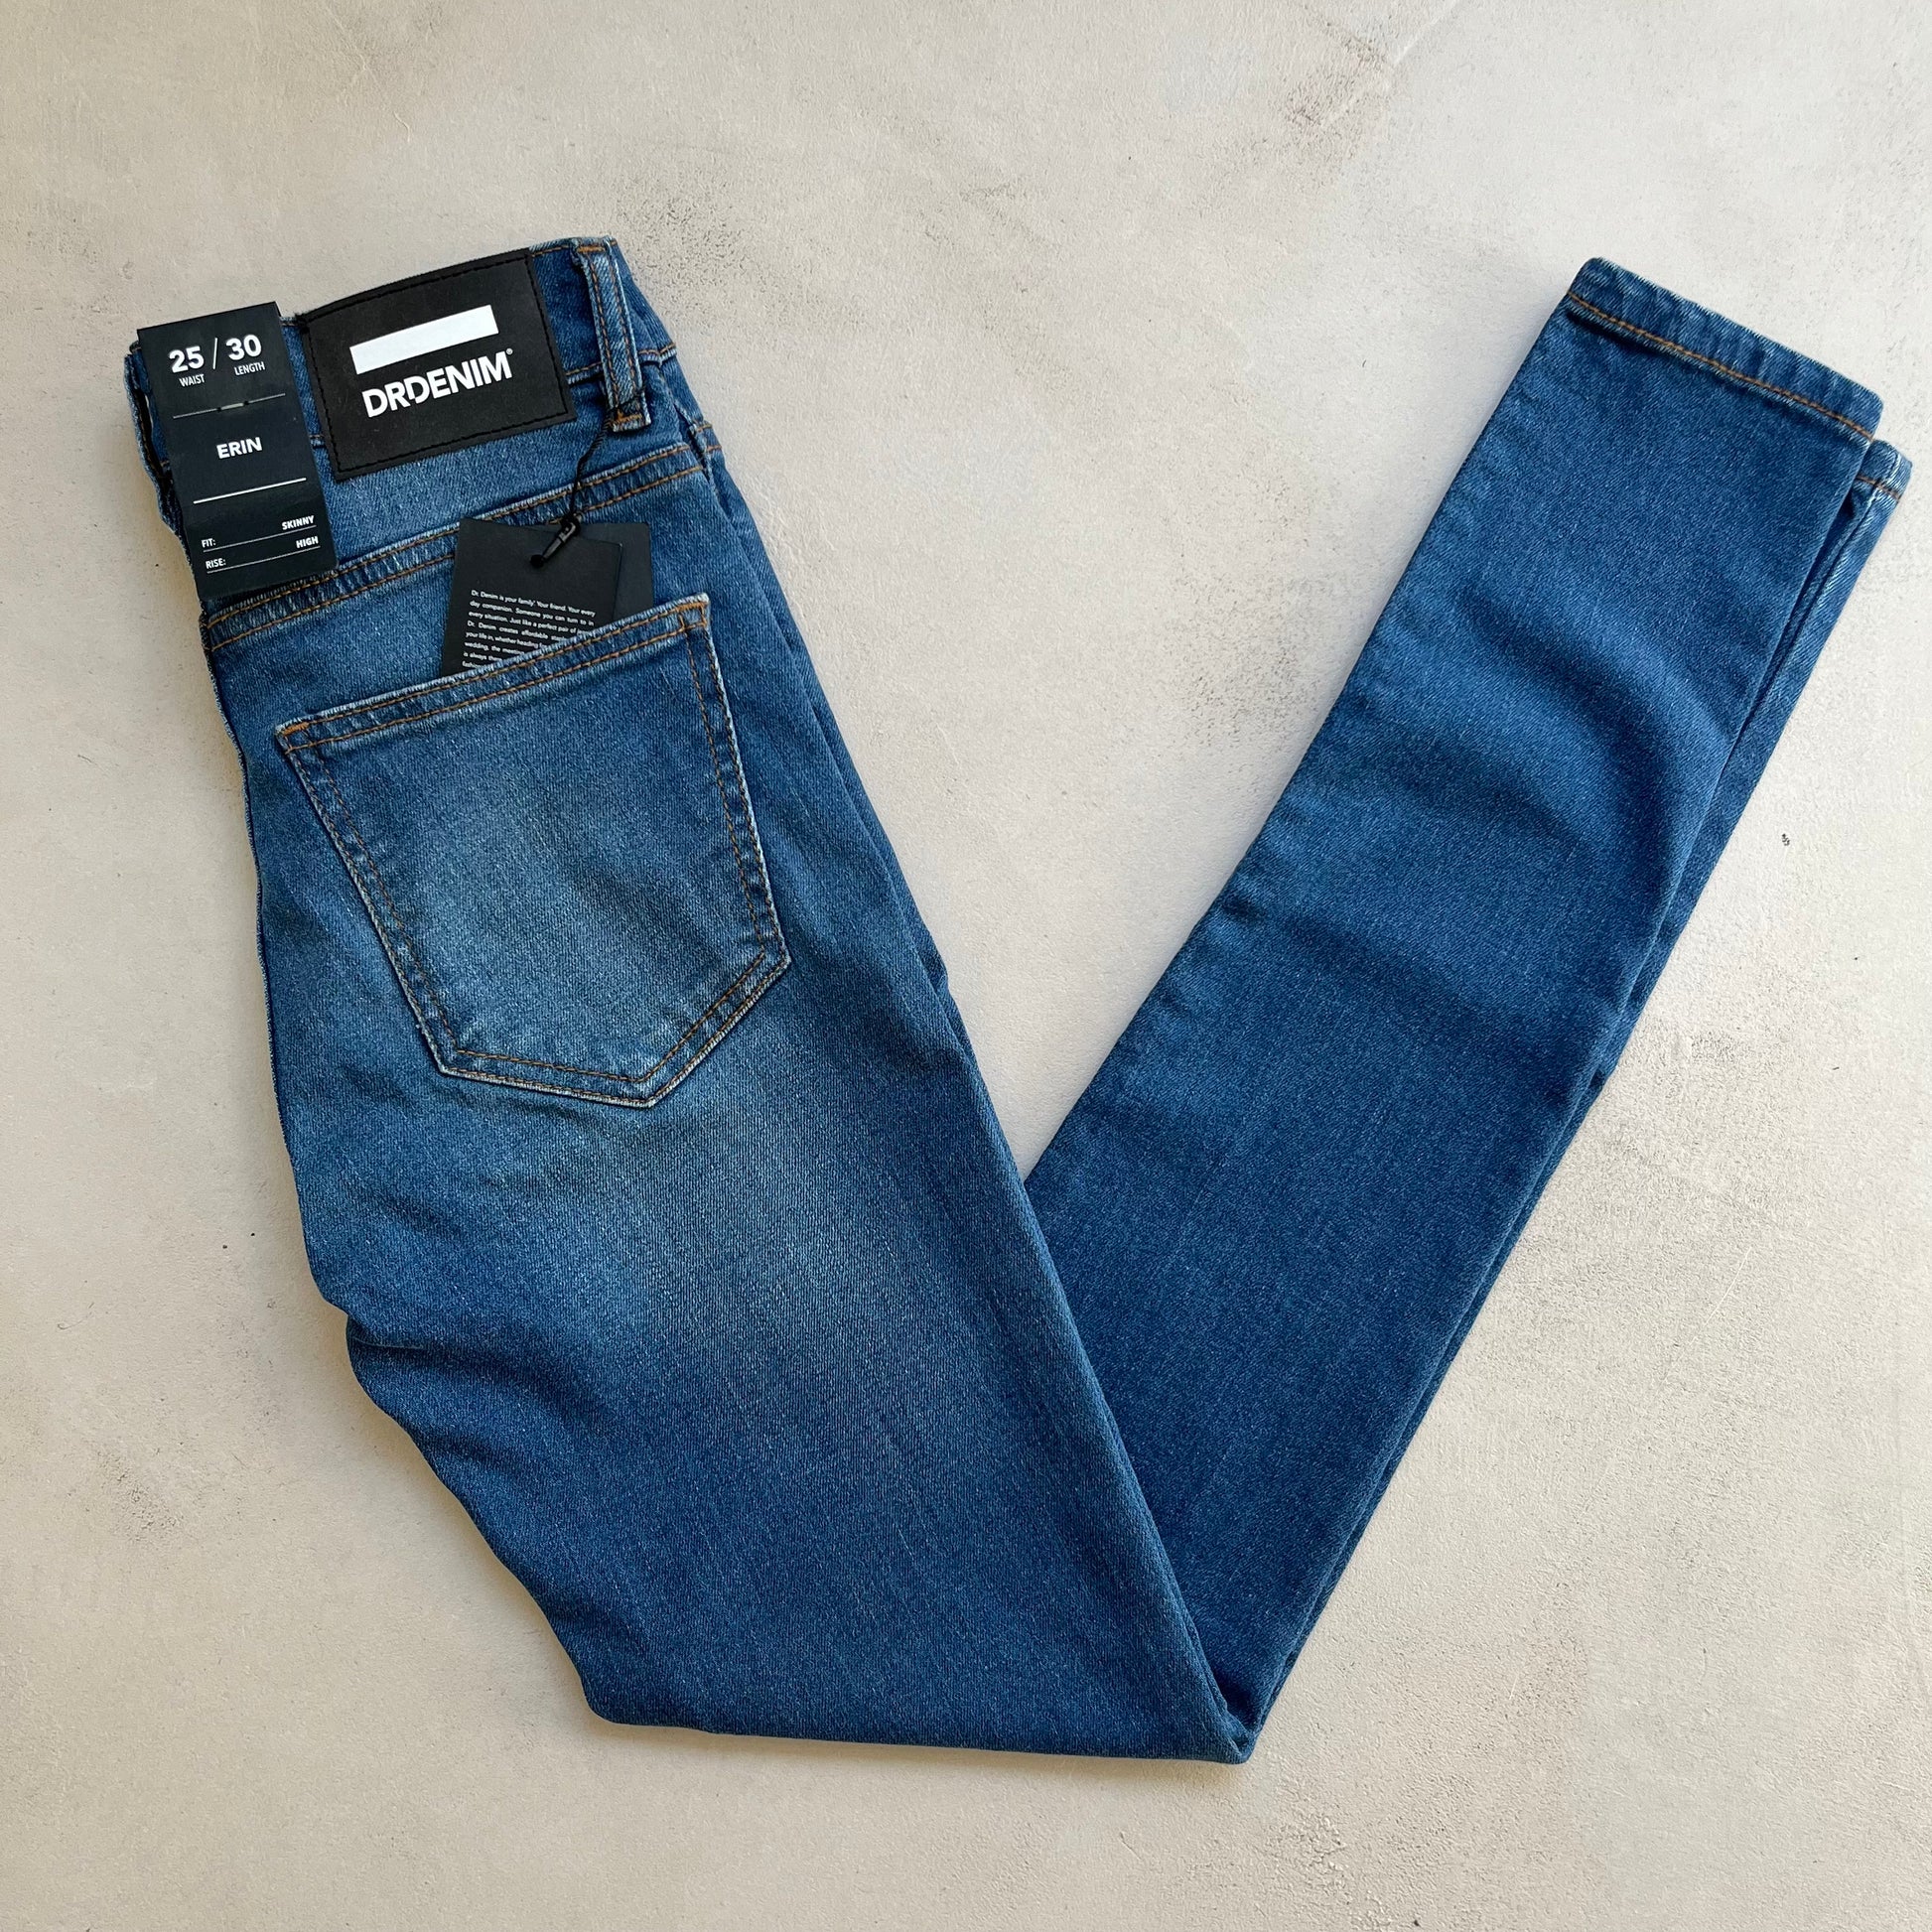 A pair of high-rise Erin - Washed Blue jeans with a Dr Denim tag on them.